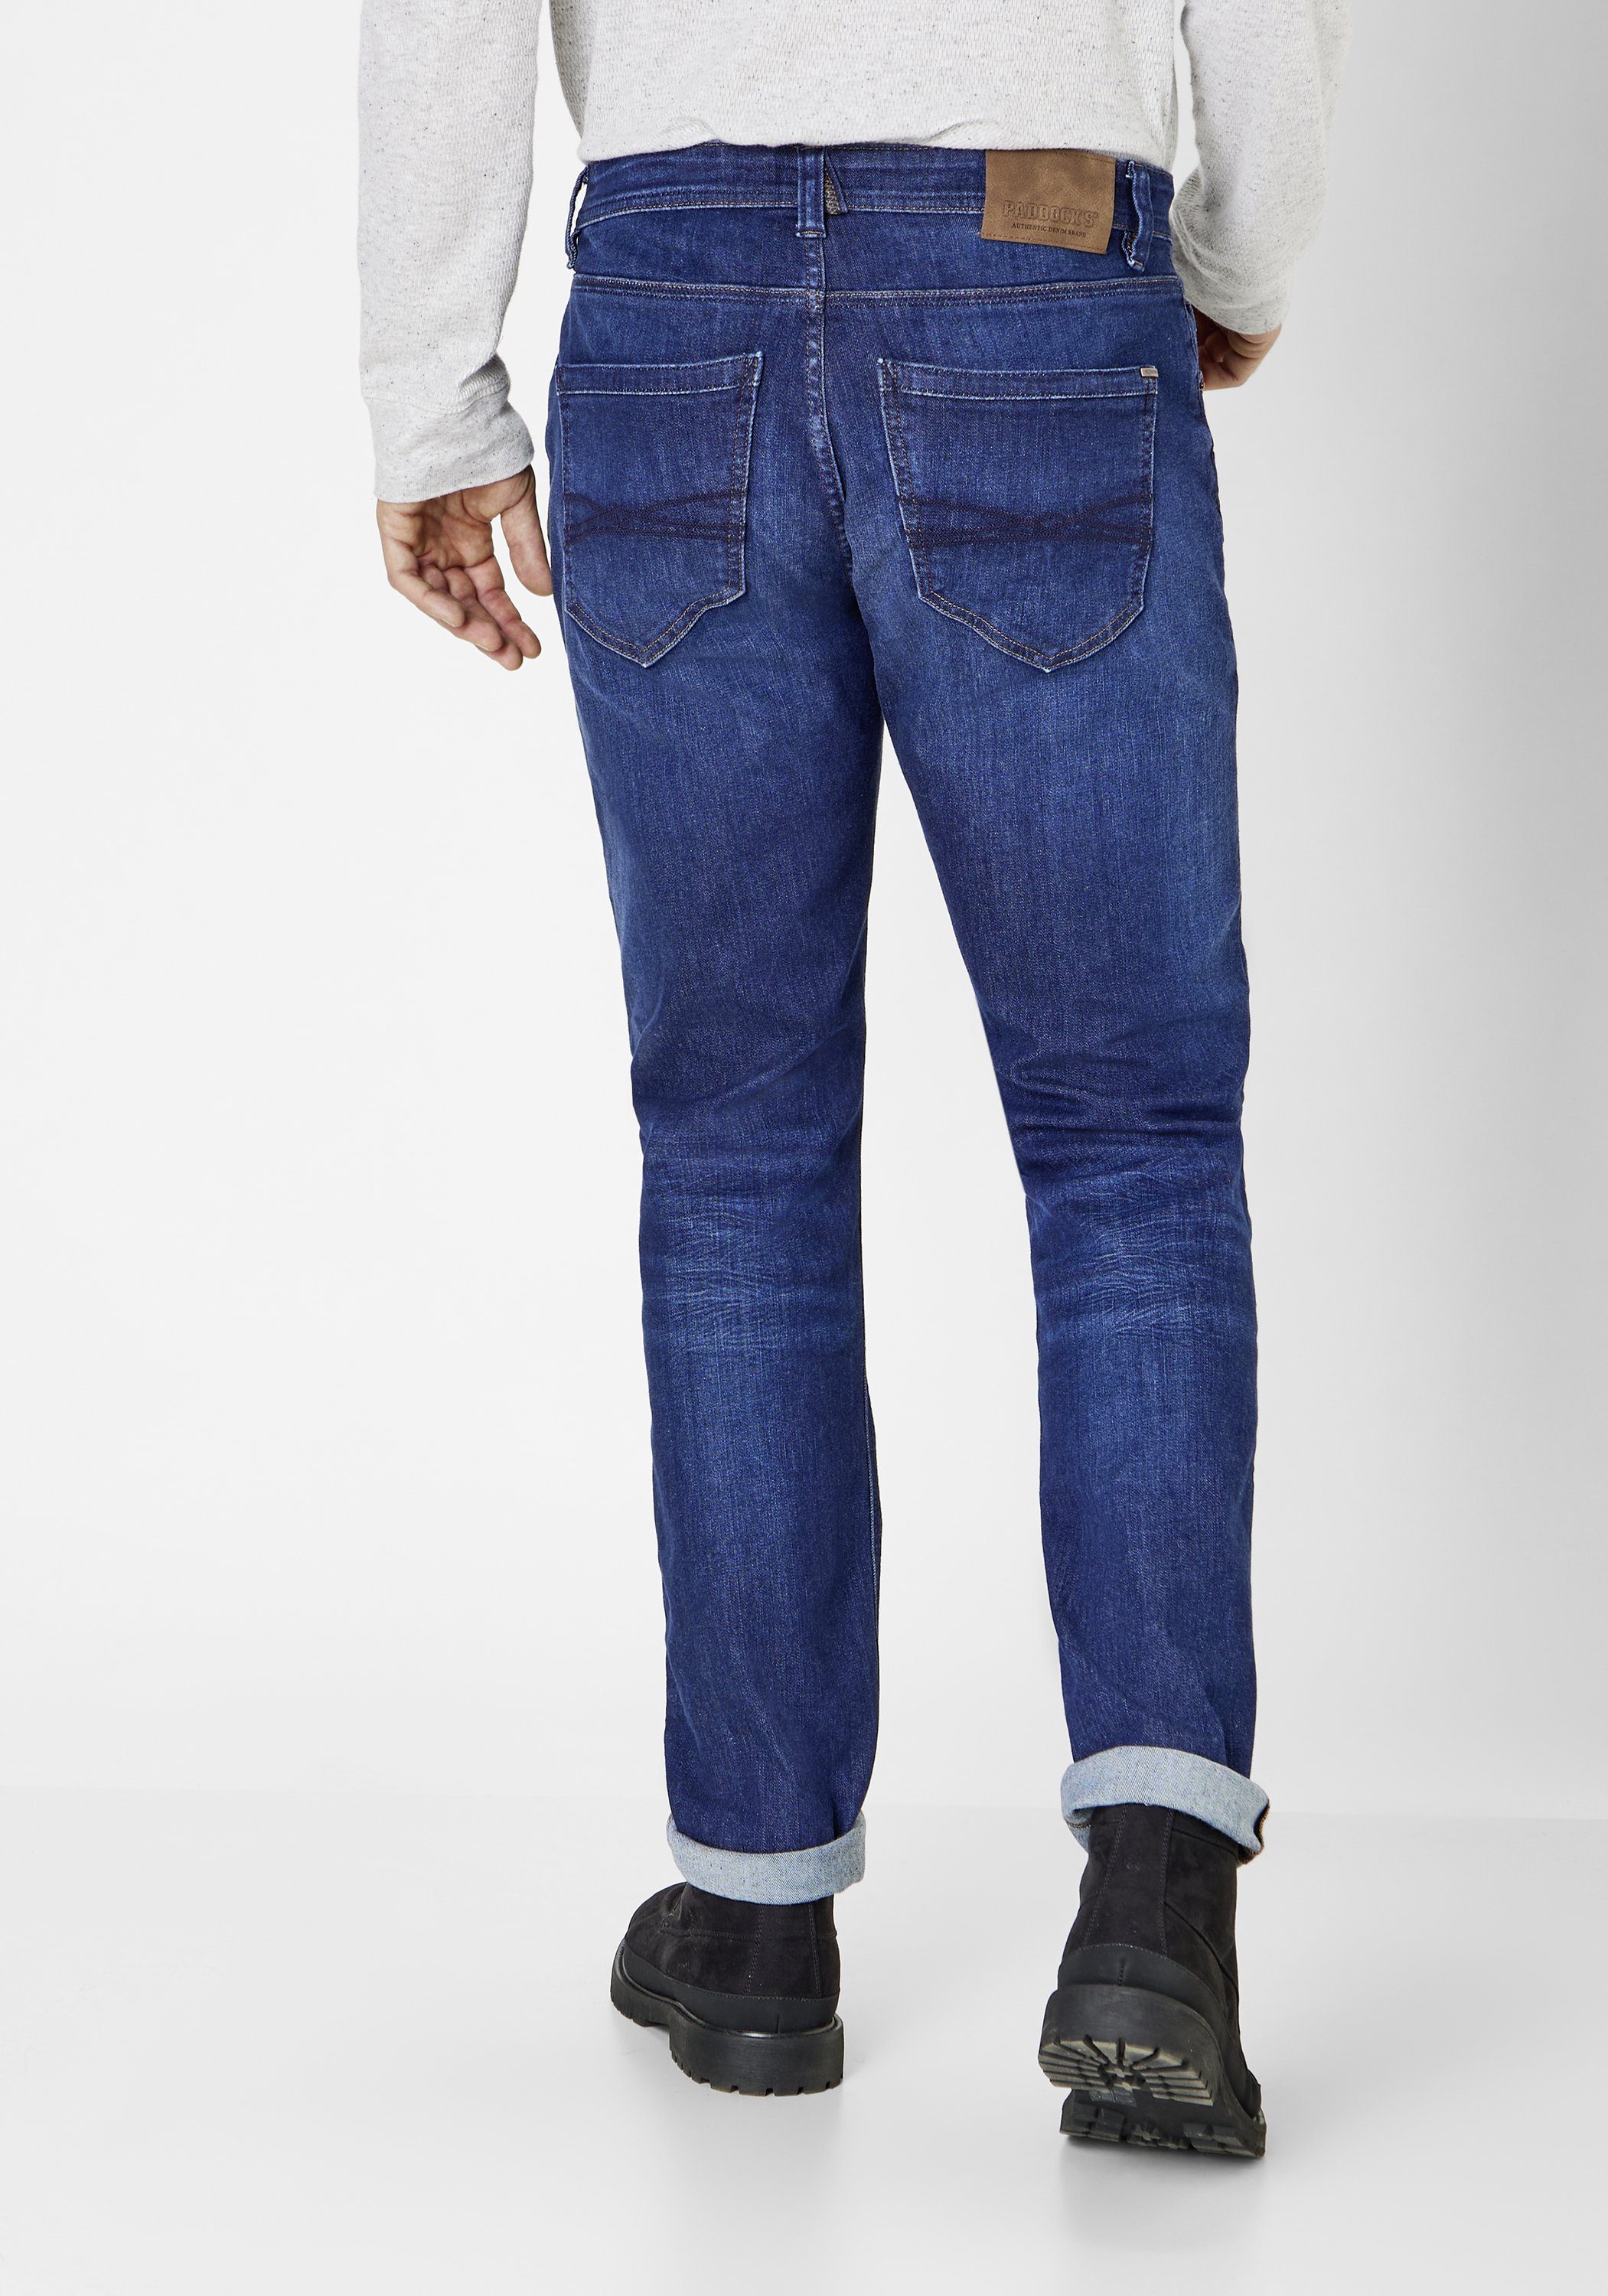 Paddock's Tapered-fit-Jeans RAY blue vintage Comfort & Stretch wash Motion dark